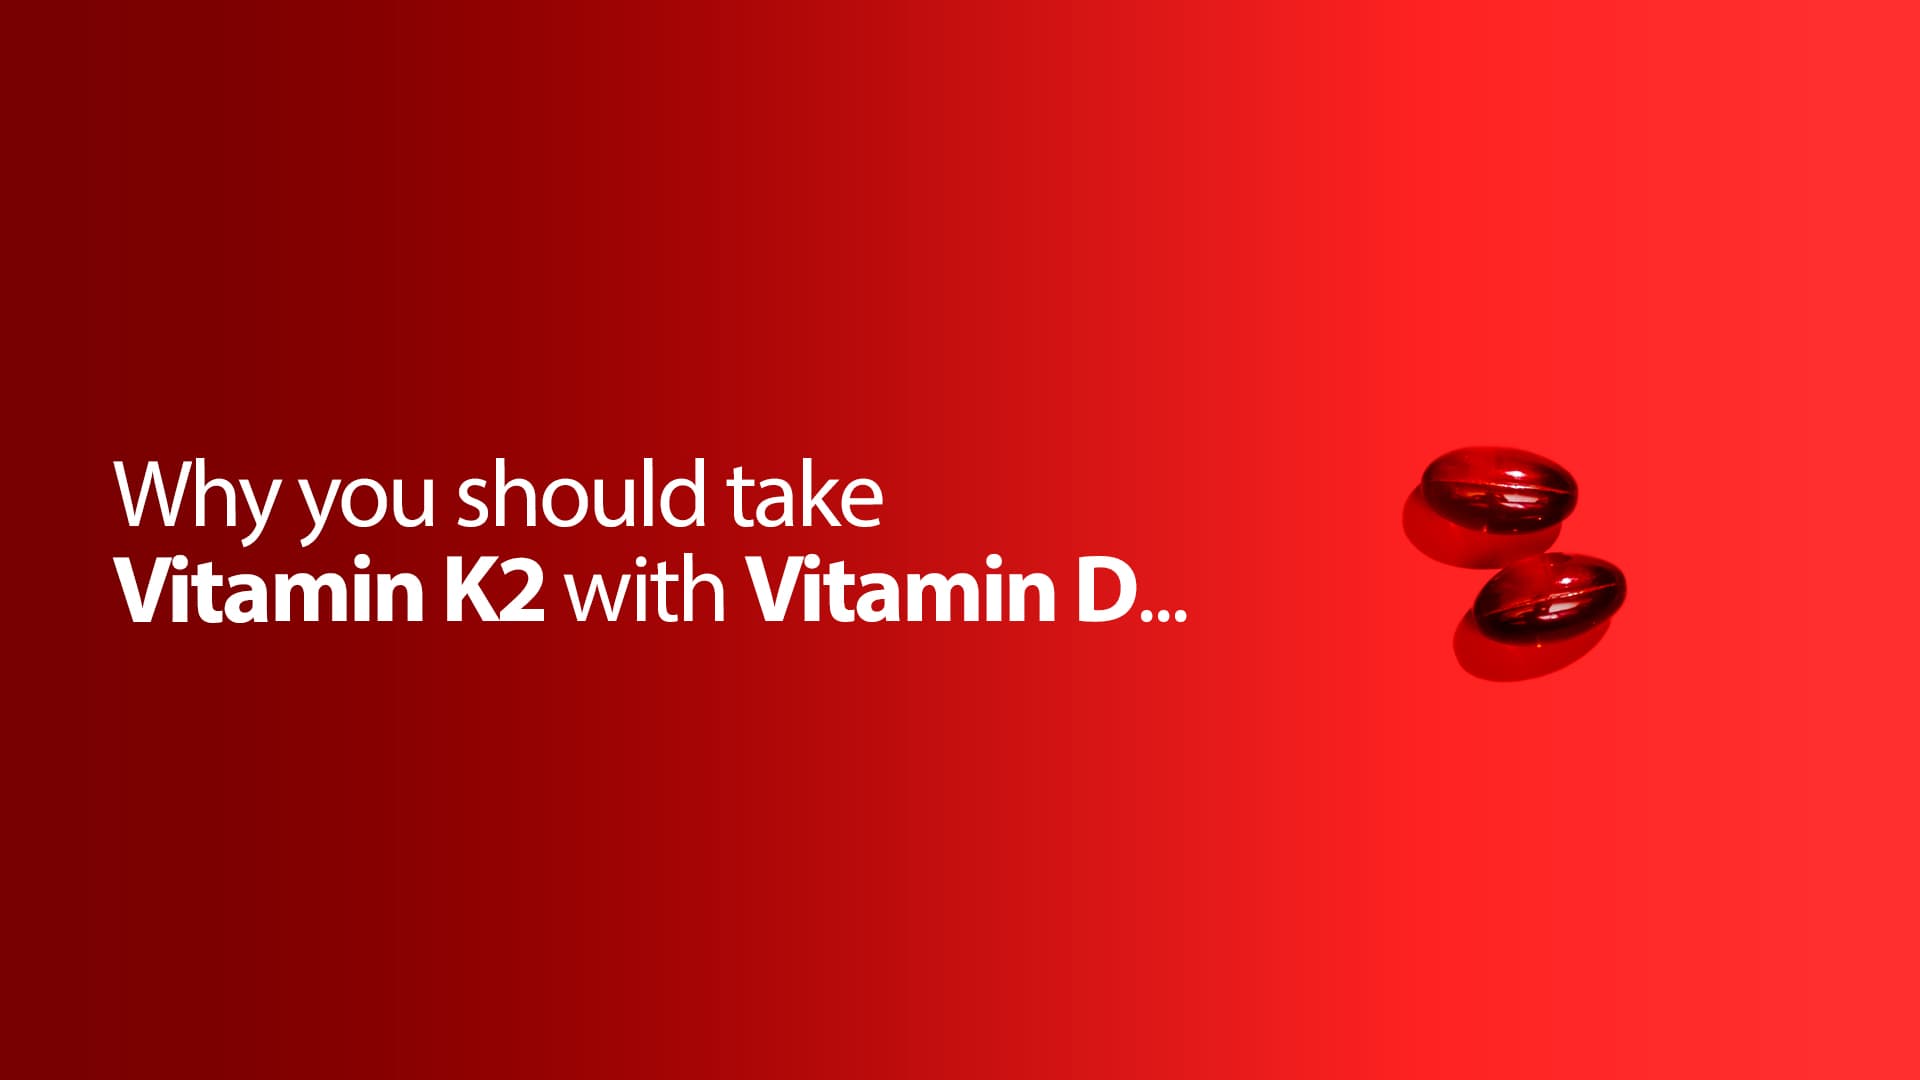 Vitamin D and Vitamin K2 work together...